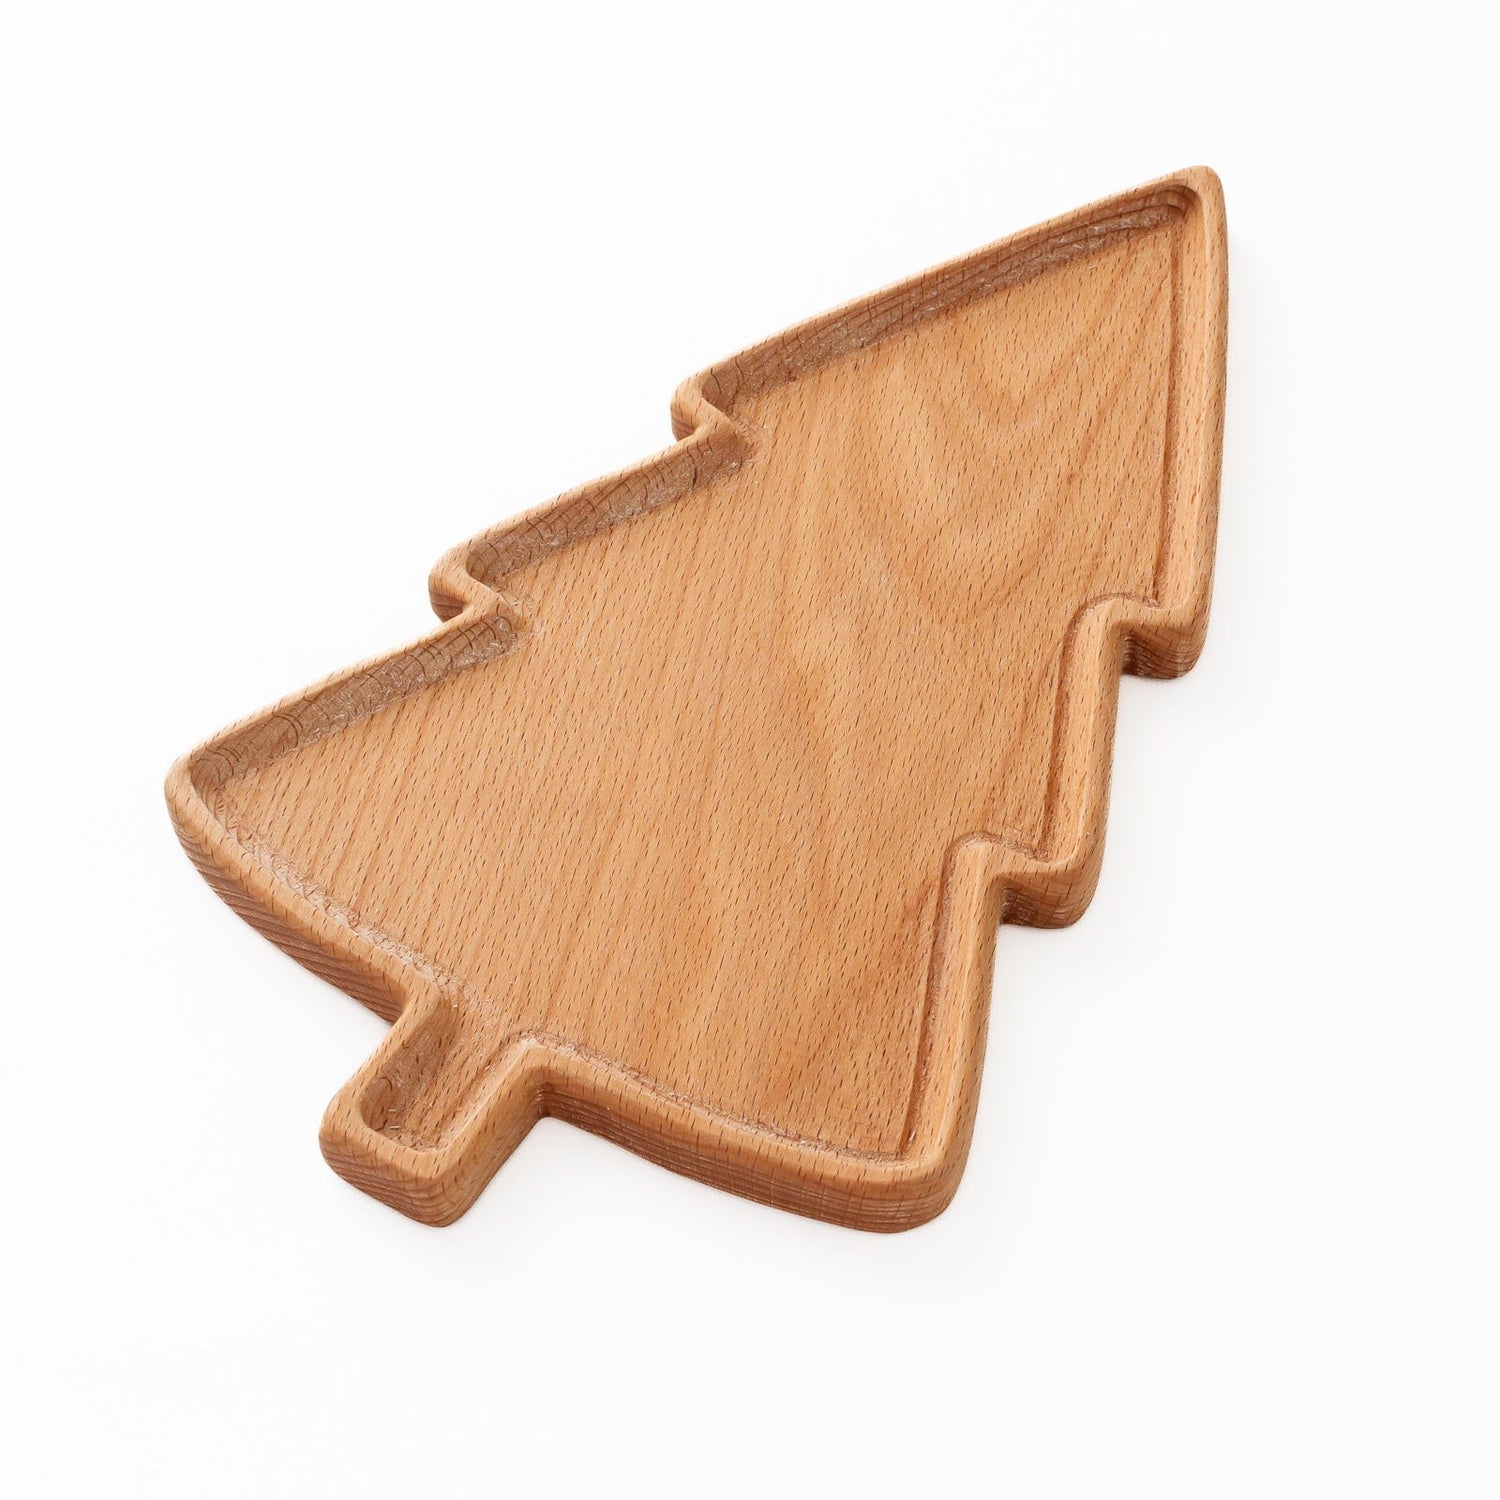 Aw & Co. Sensory Play Large Wooden Tree Plate / Sensory Tray (Made in Canada)